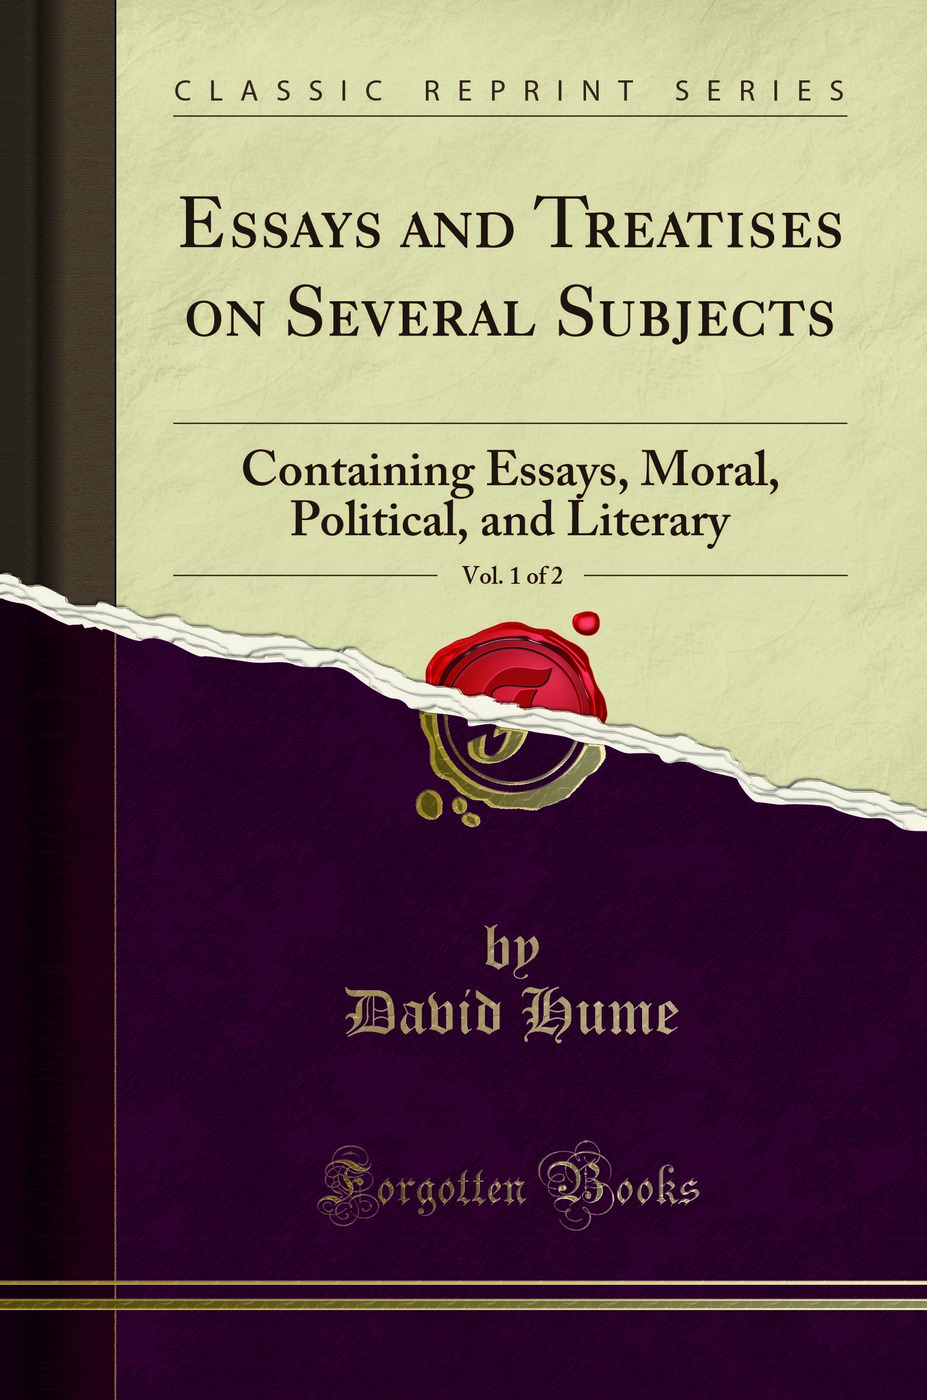 Essays and Treatises on Several Subjects, Vol. 1 of 2 (Classic Reprint) - David Hume